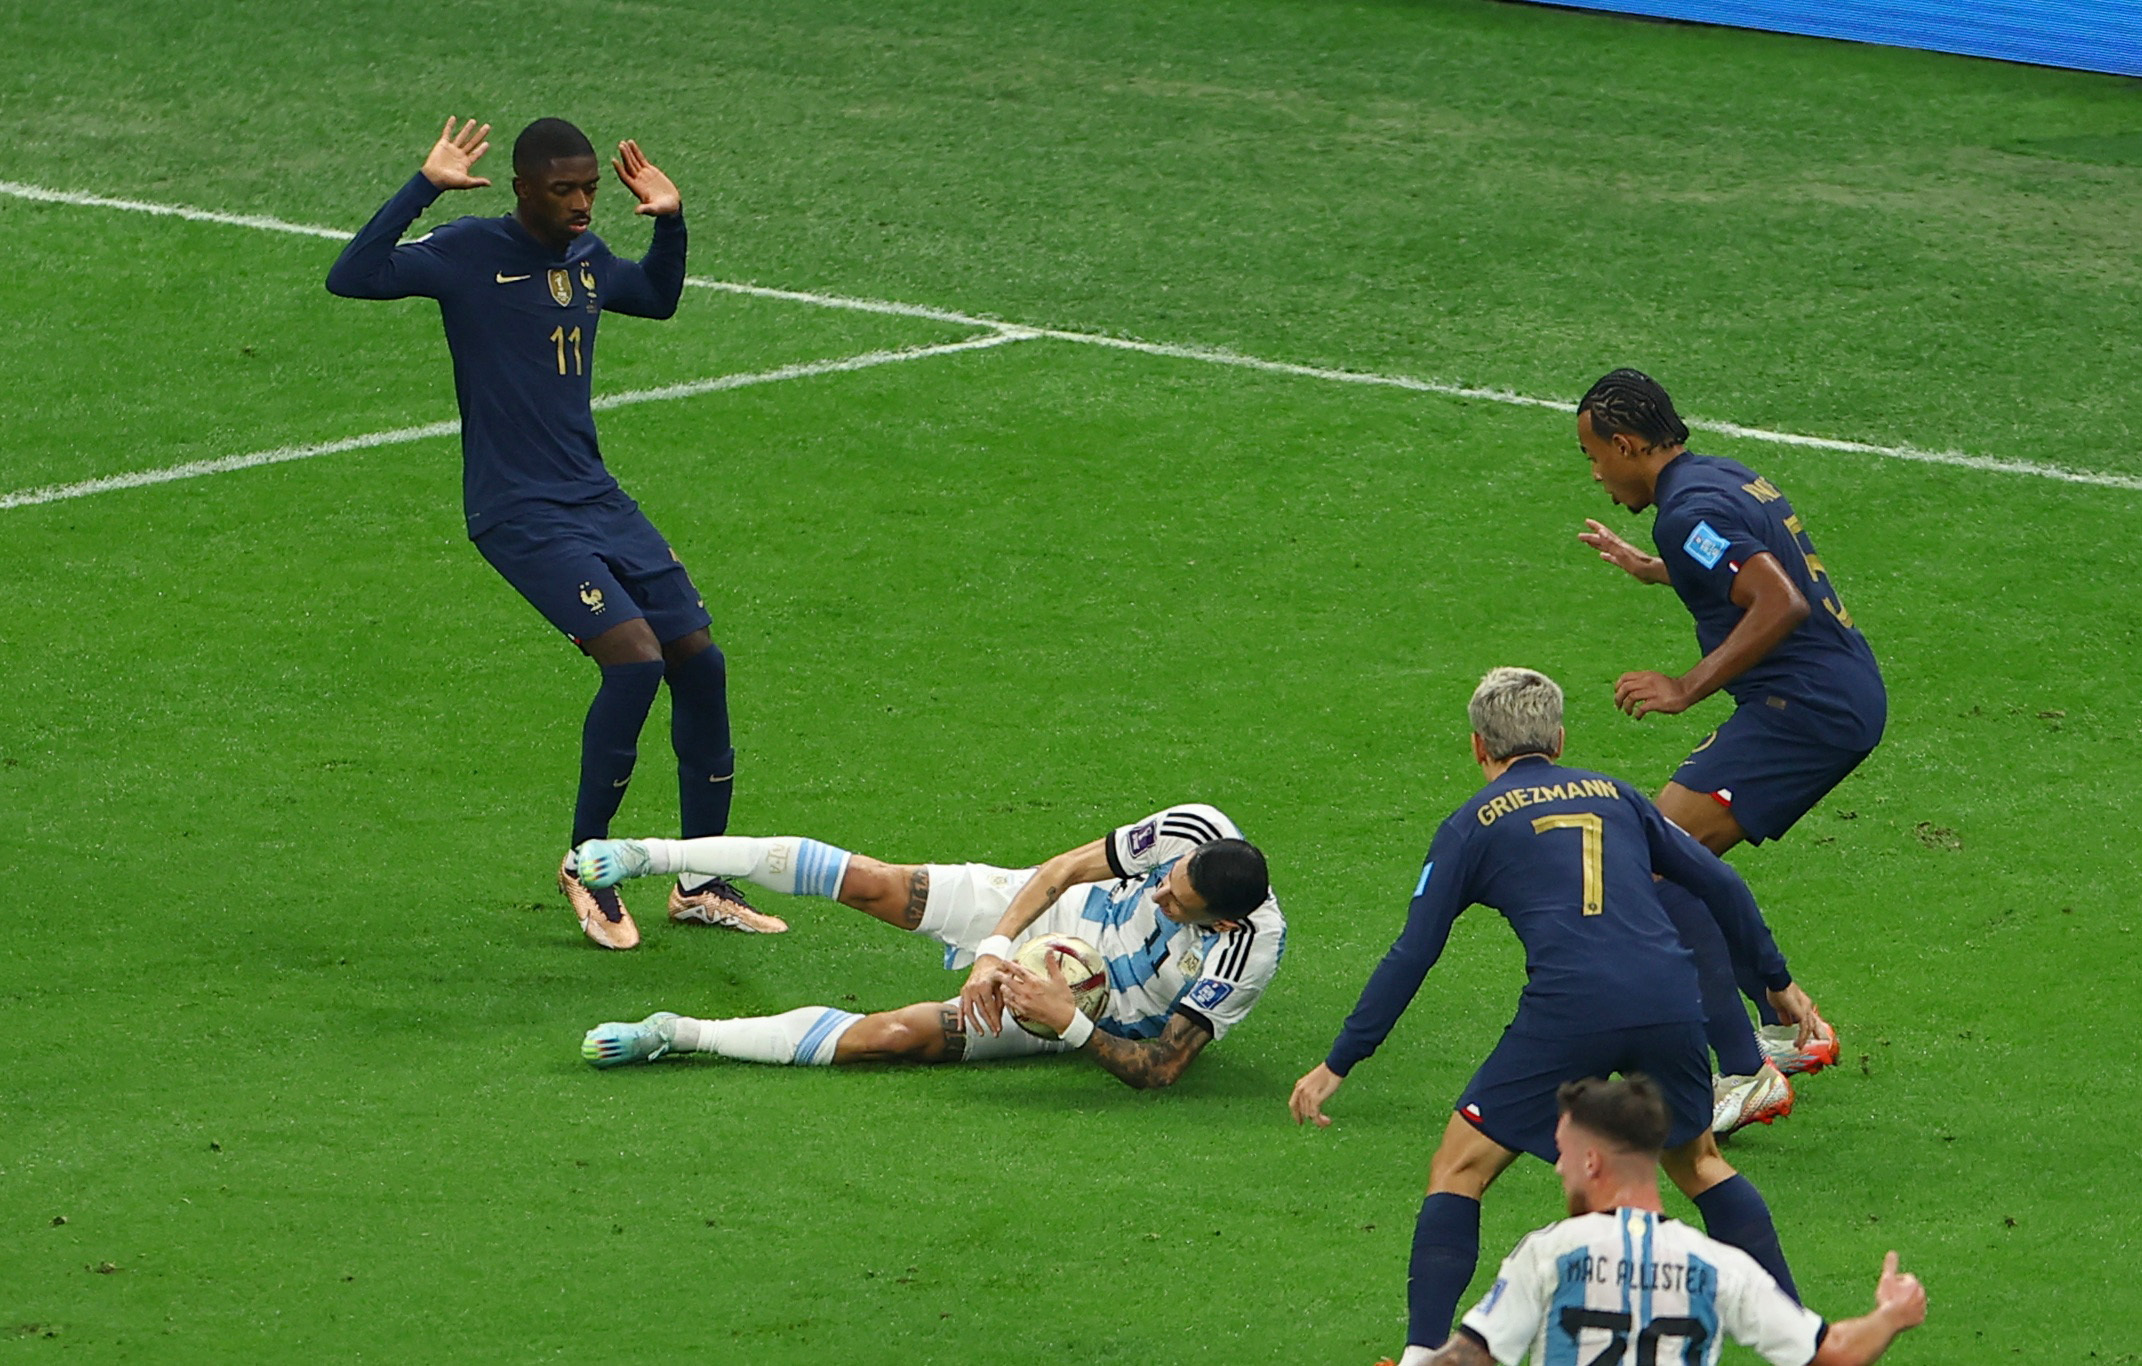 Soccer Football - FIFA World Cup Qatar 2022 - Final - Argentina v France - Lusail Stadium, Lusail, Qatar - December 18, 2022 Argentina's Angel Di Maria goes down under the challenge of France's Ousmane Dembele before referee Szymon Marciniak awards a penalty to Argentina REUTERS/Molly Darlington